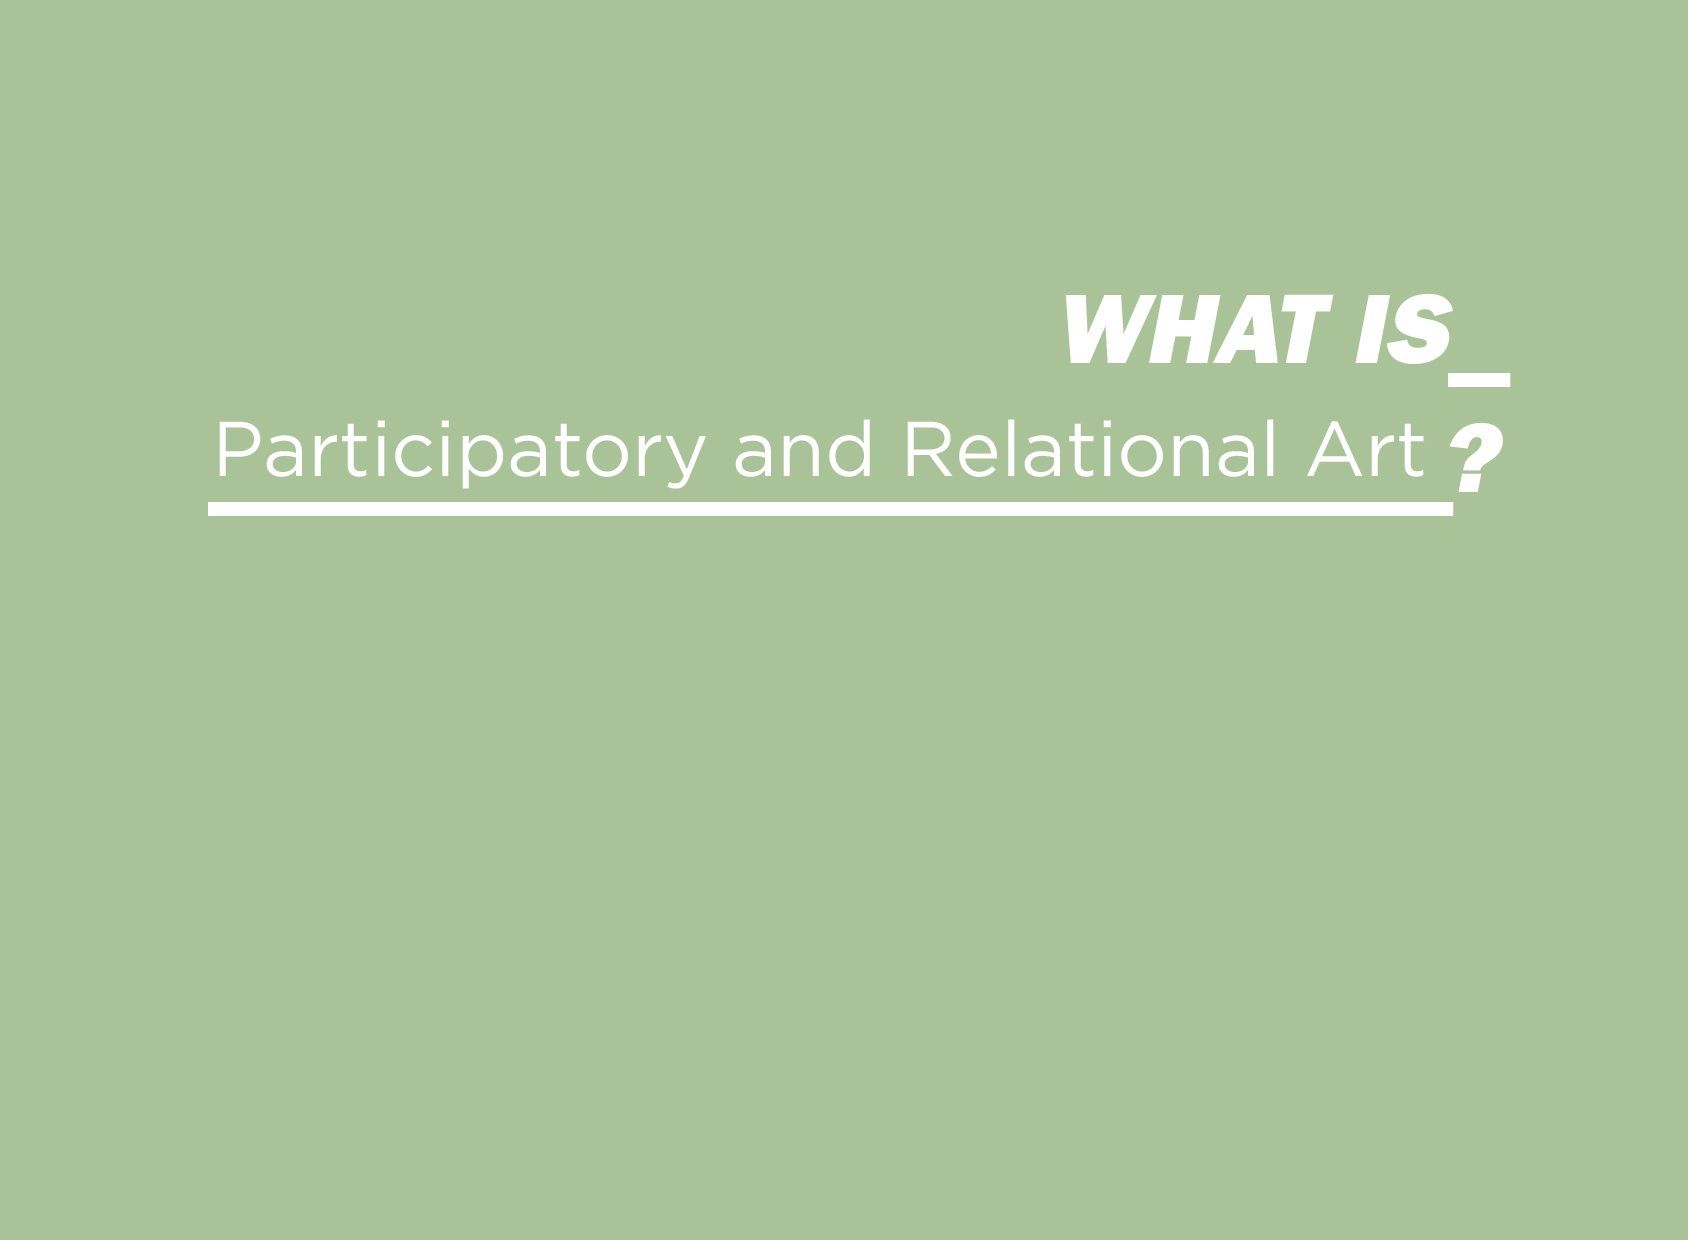 What is Participatory and Relational Art